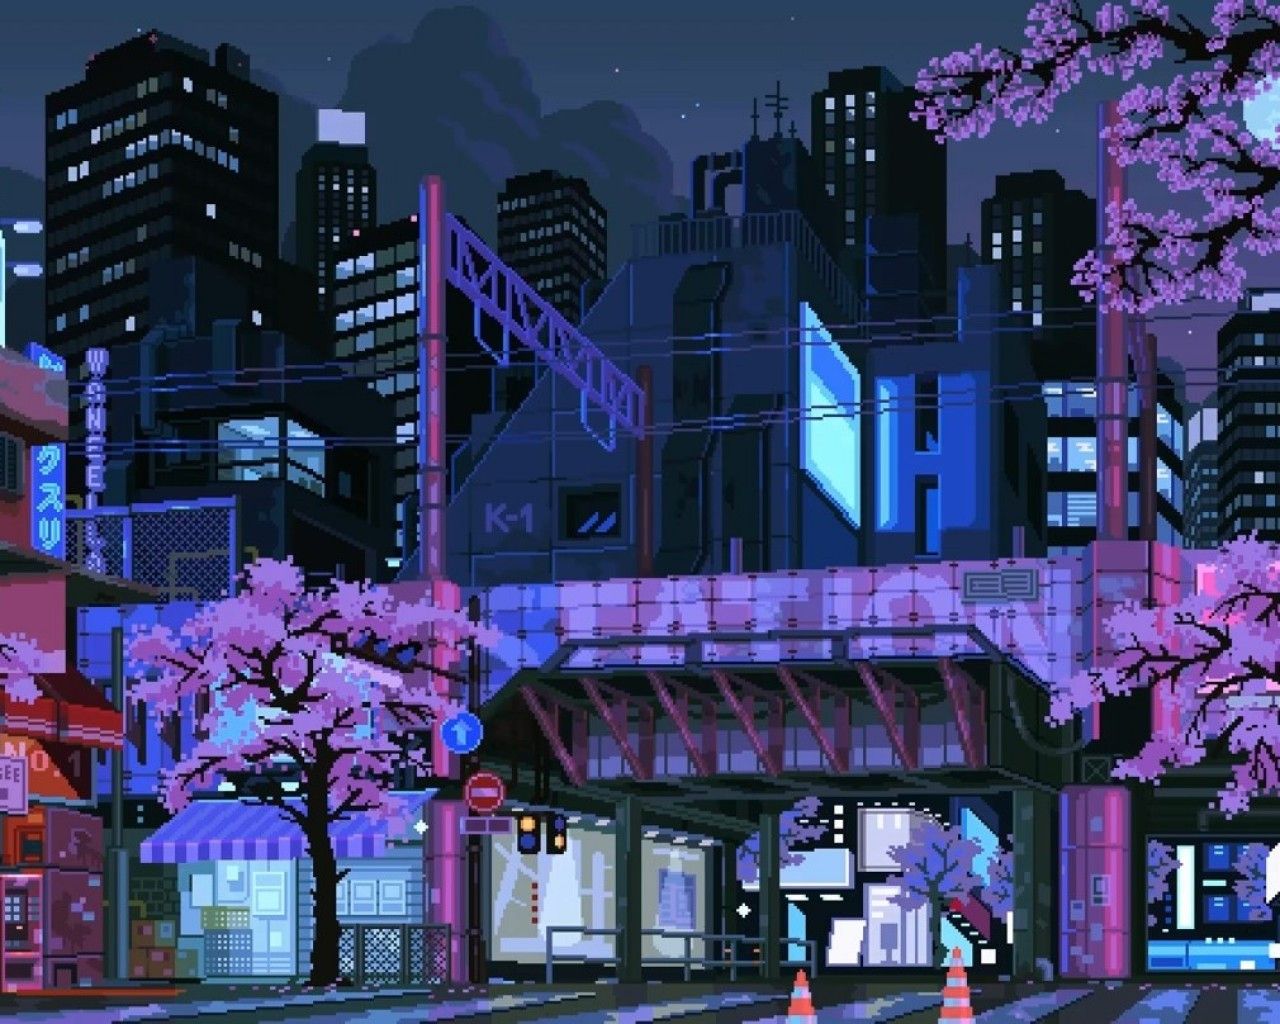 A city at night with neon lights and trees - 1280x1024